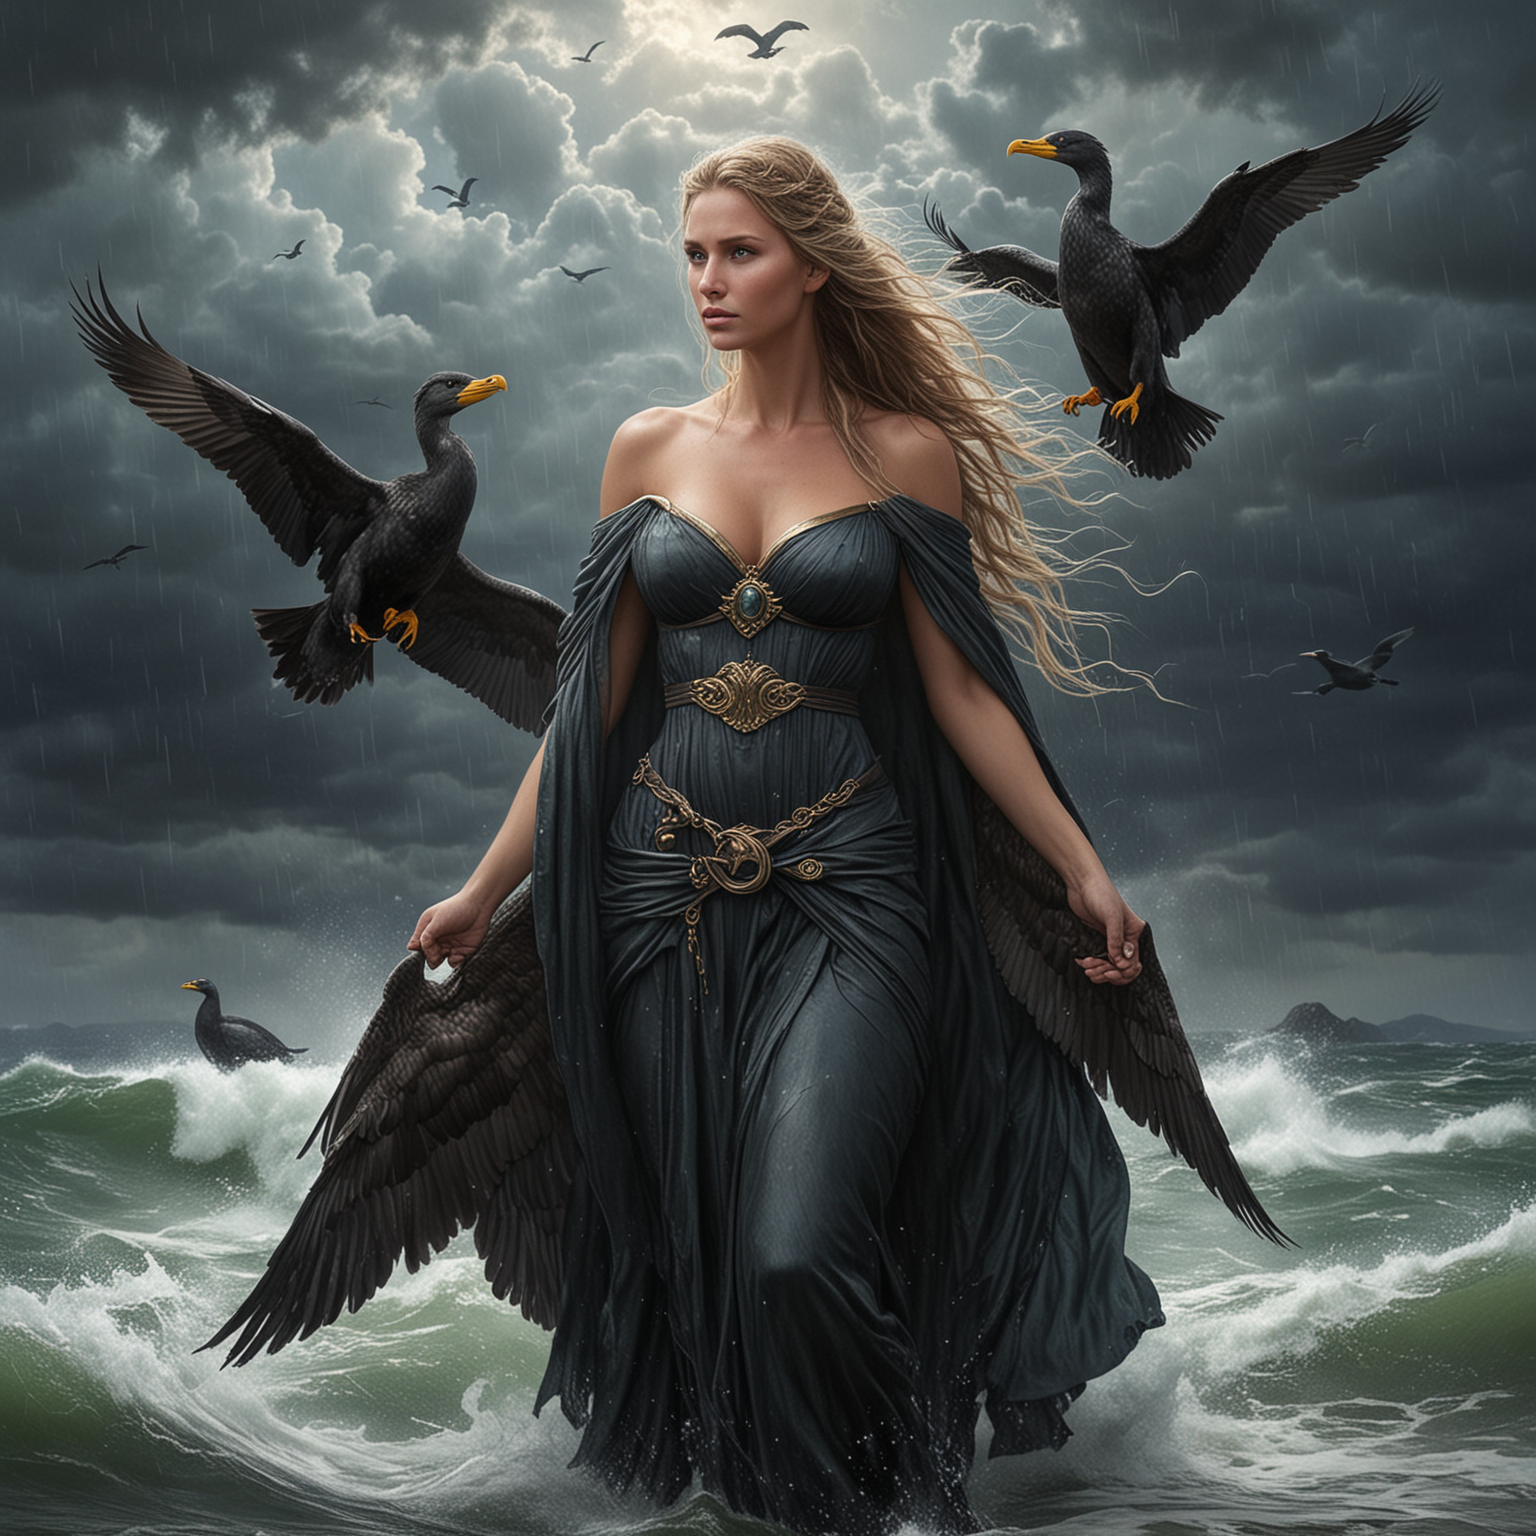 Mischievous Storm Goddess with Three Sons and Cormorant Companions